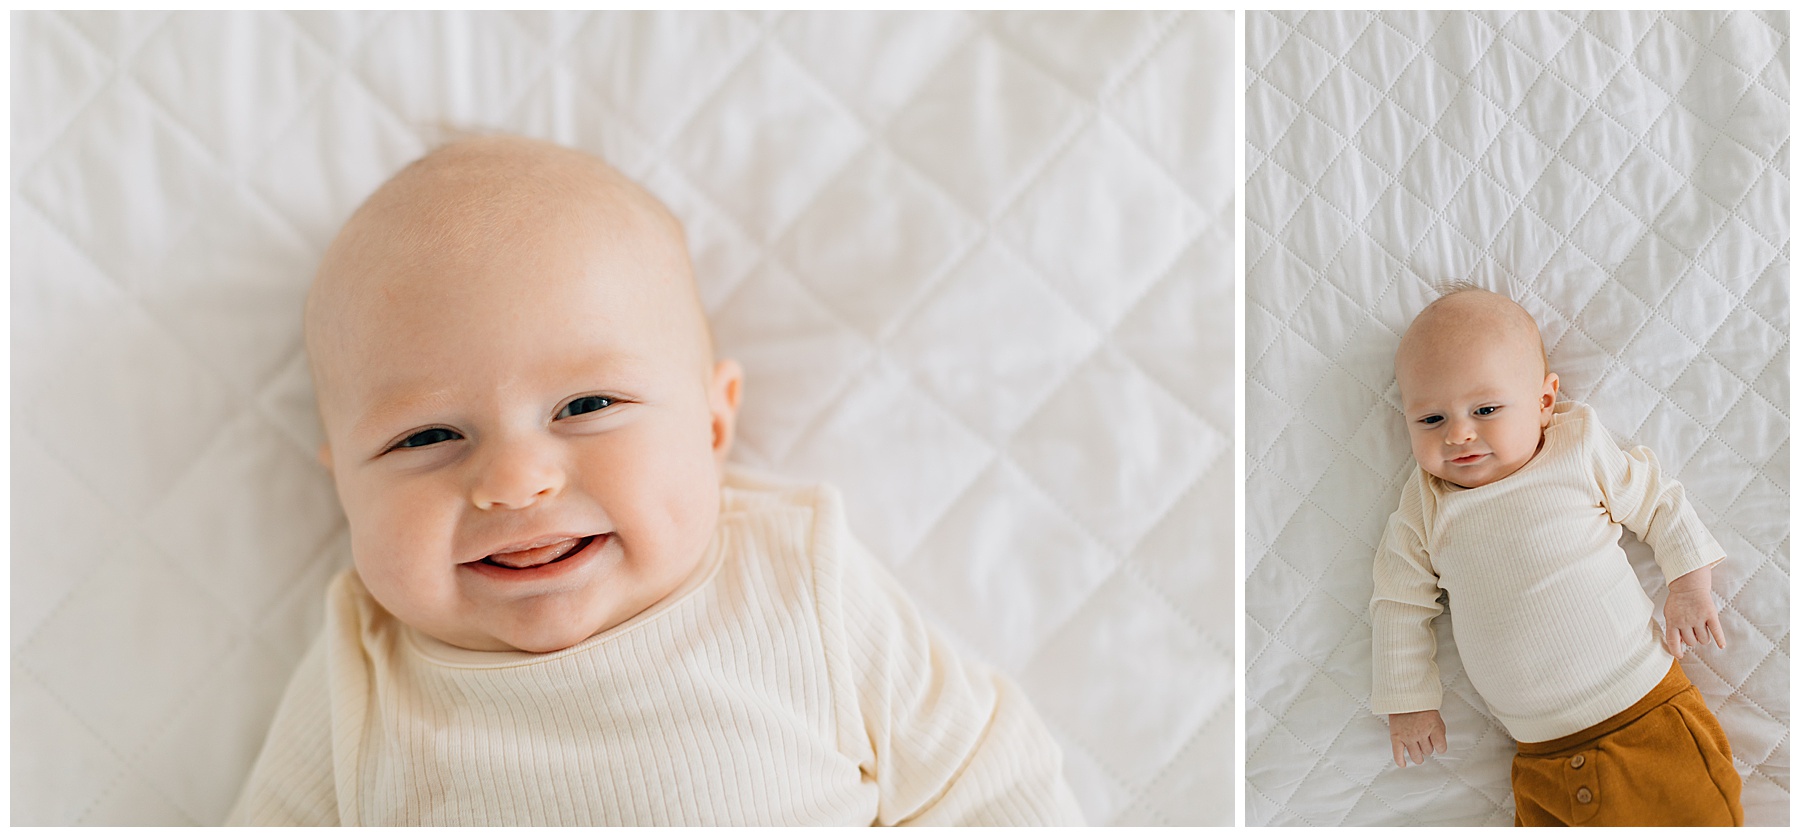 Life and Style Studio Newborn Session | Baby R